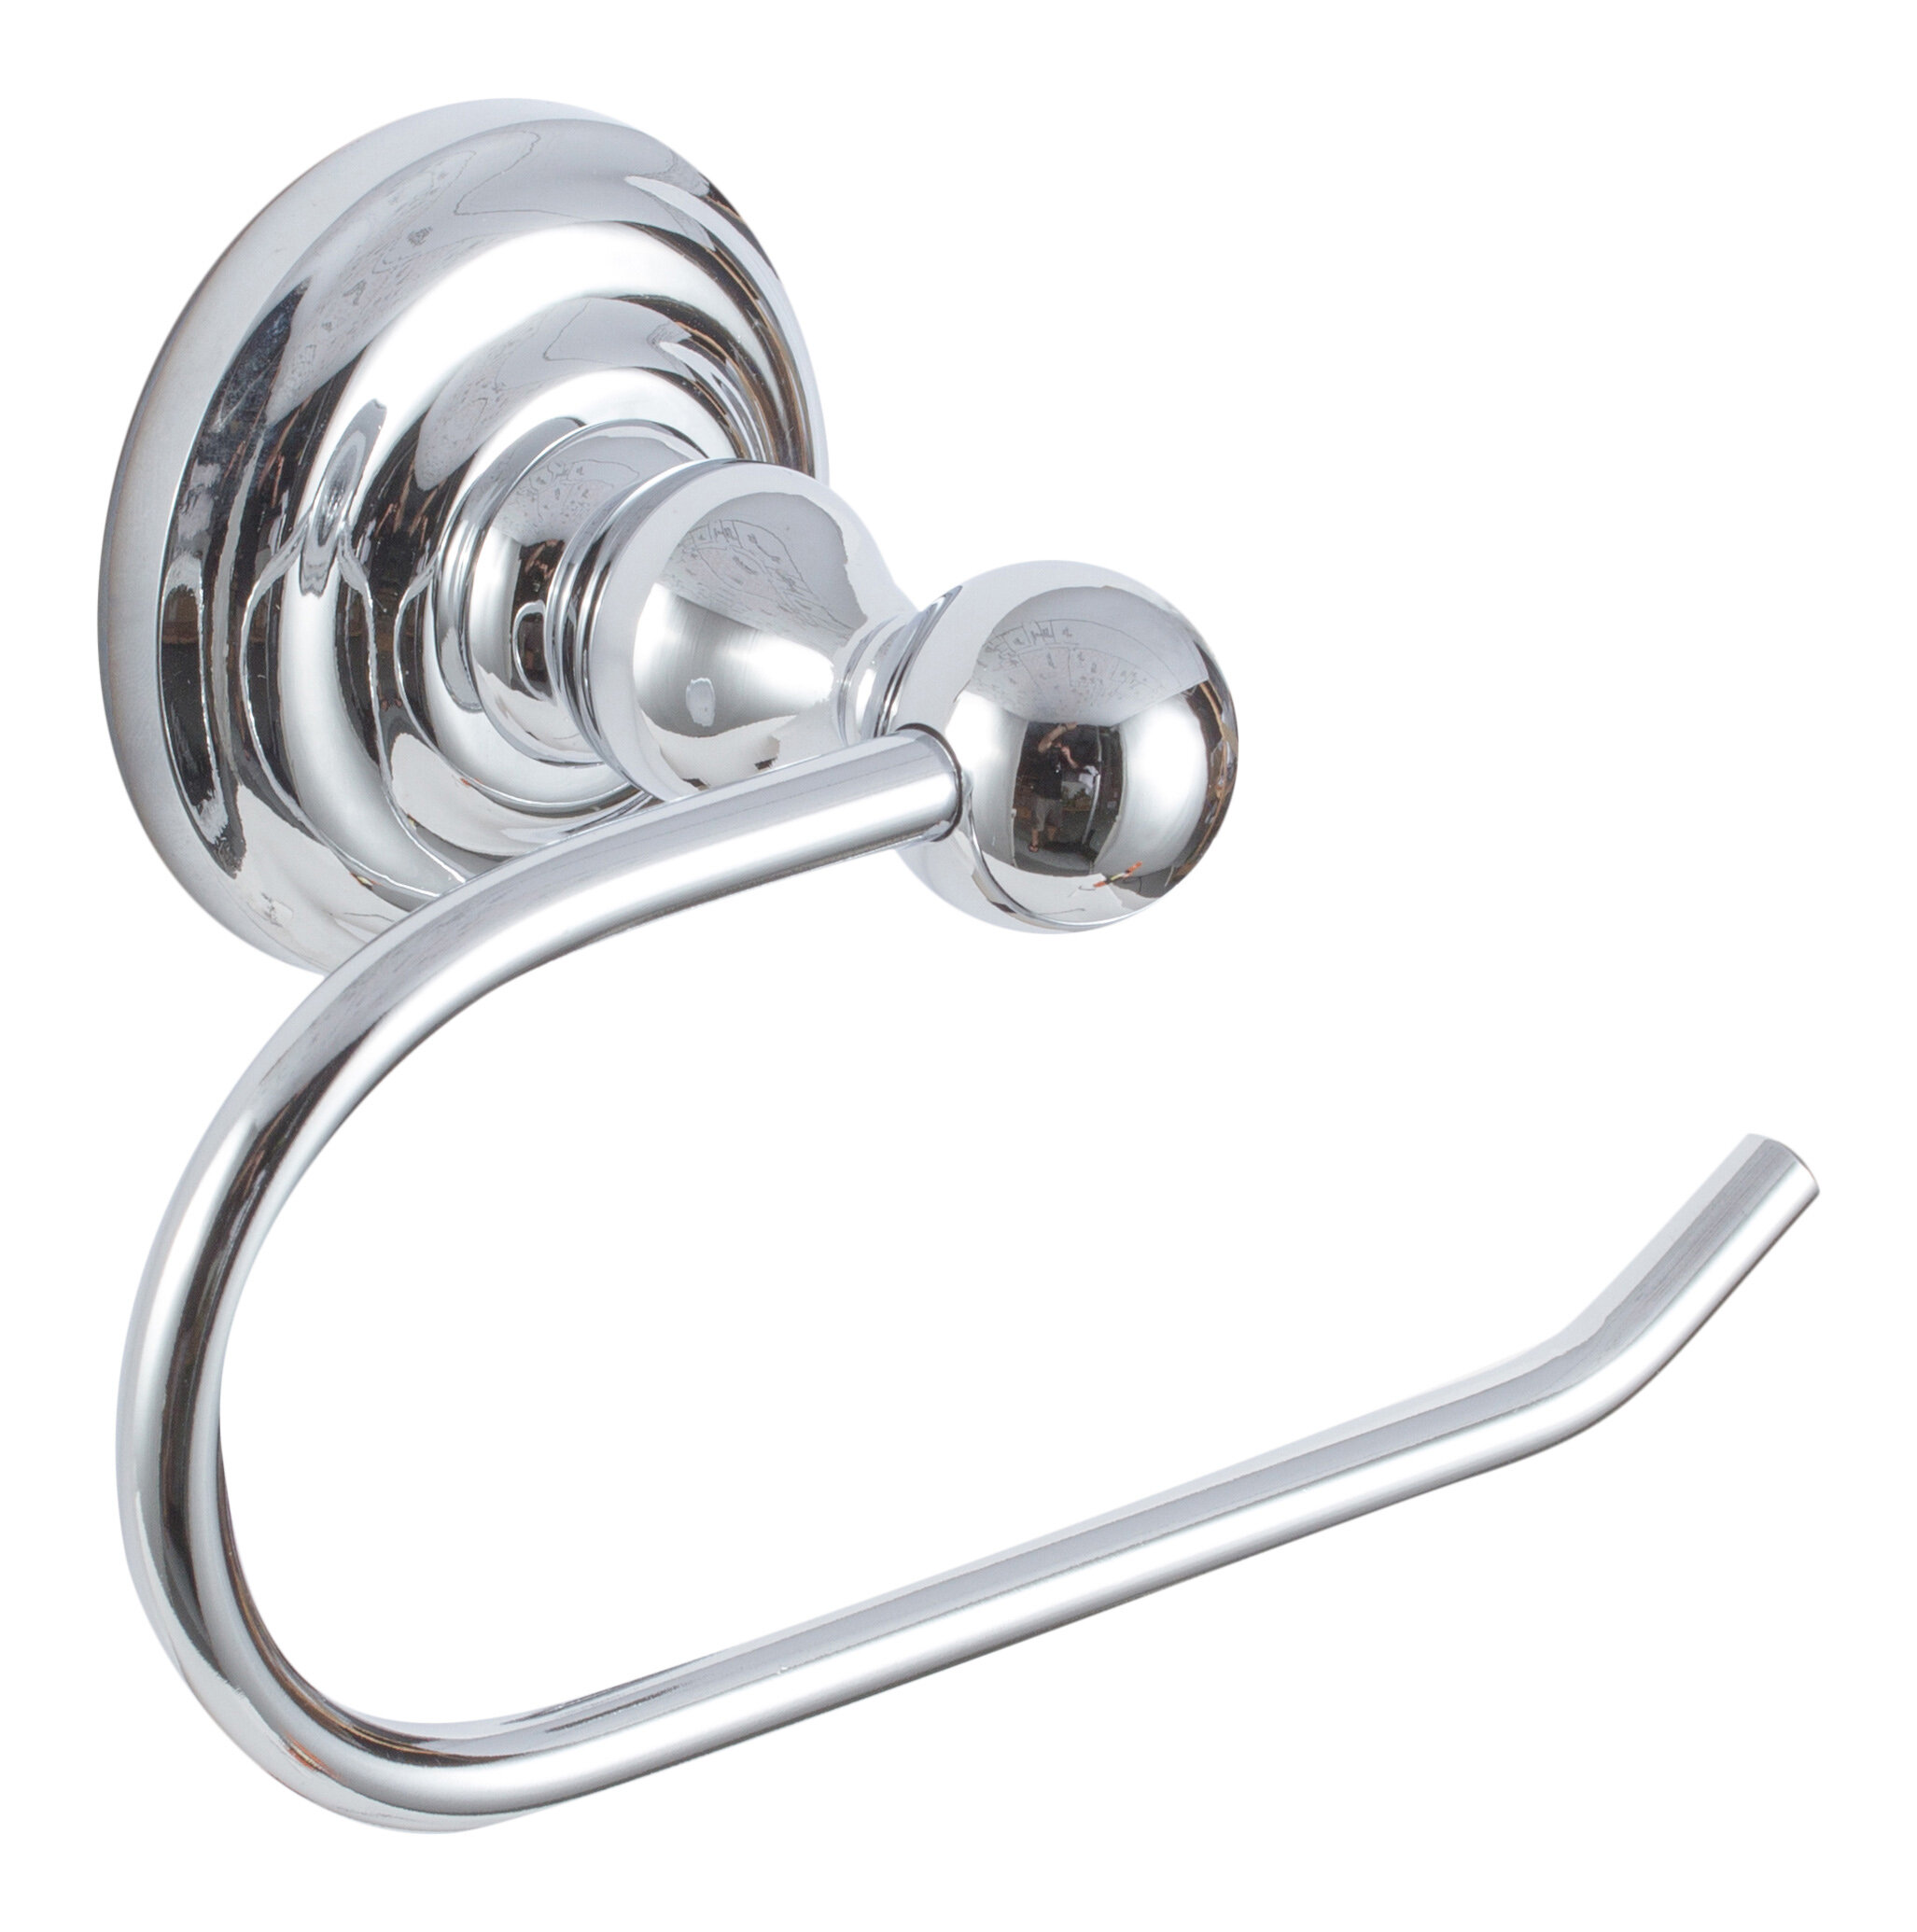 Mission Wall Mounted Spare Toilet Paper Roll Holder, Polished Chrome